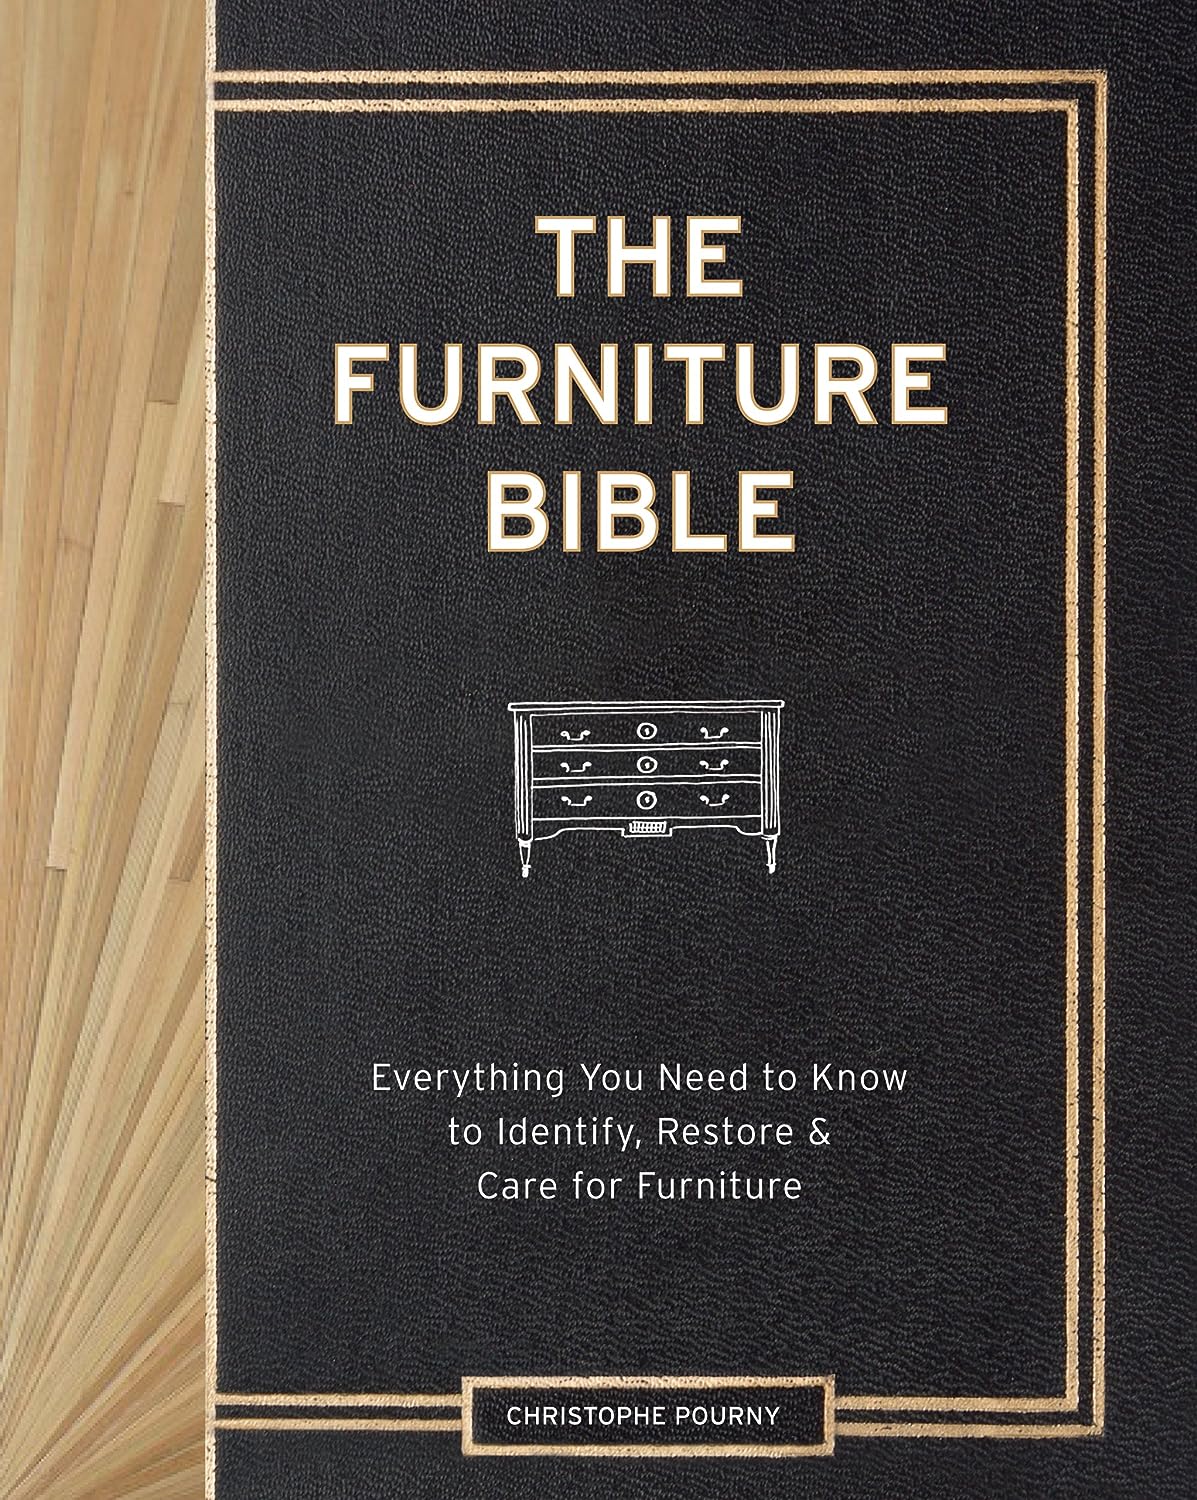 Furniture Bible, The: Everything You Need to Know to Identify, Restore  Care for Furniture: Amazon.co.uk: Christophe Pourny: 9781579655358: Books